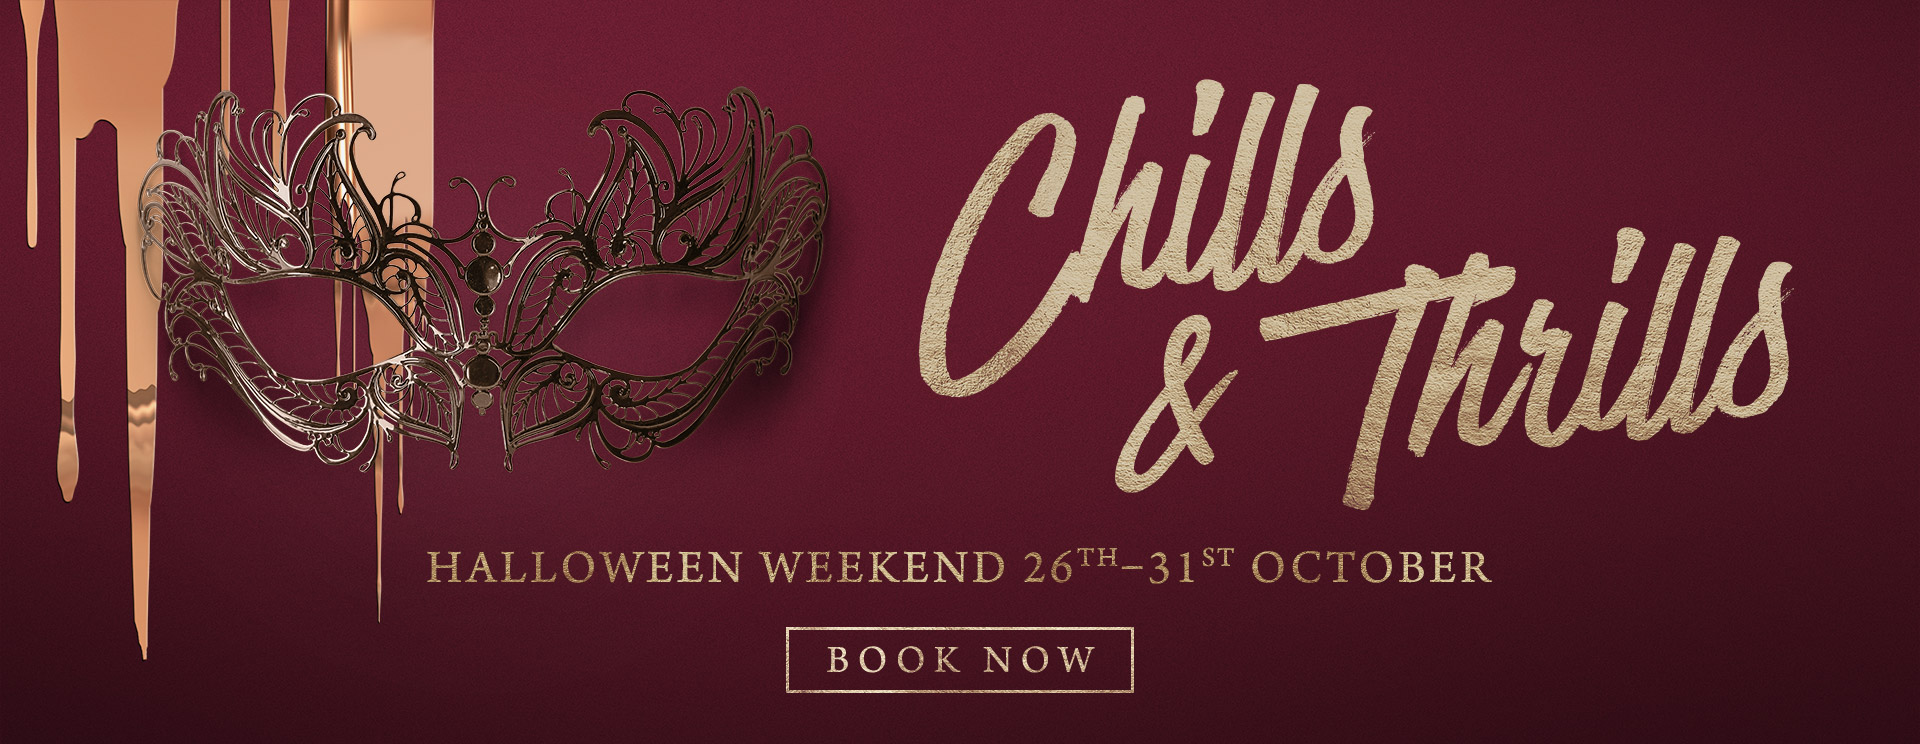 Chills & Thrills this Halloween at The Red Lion